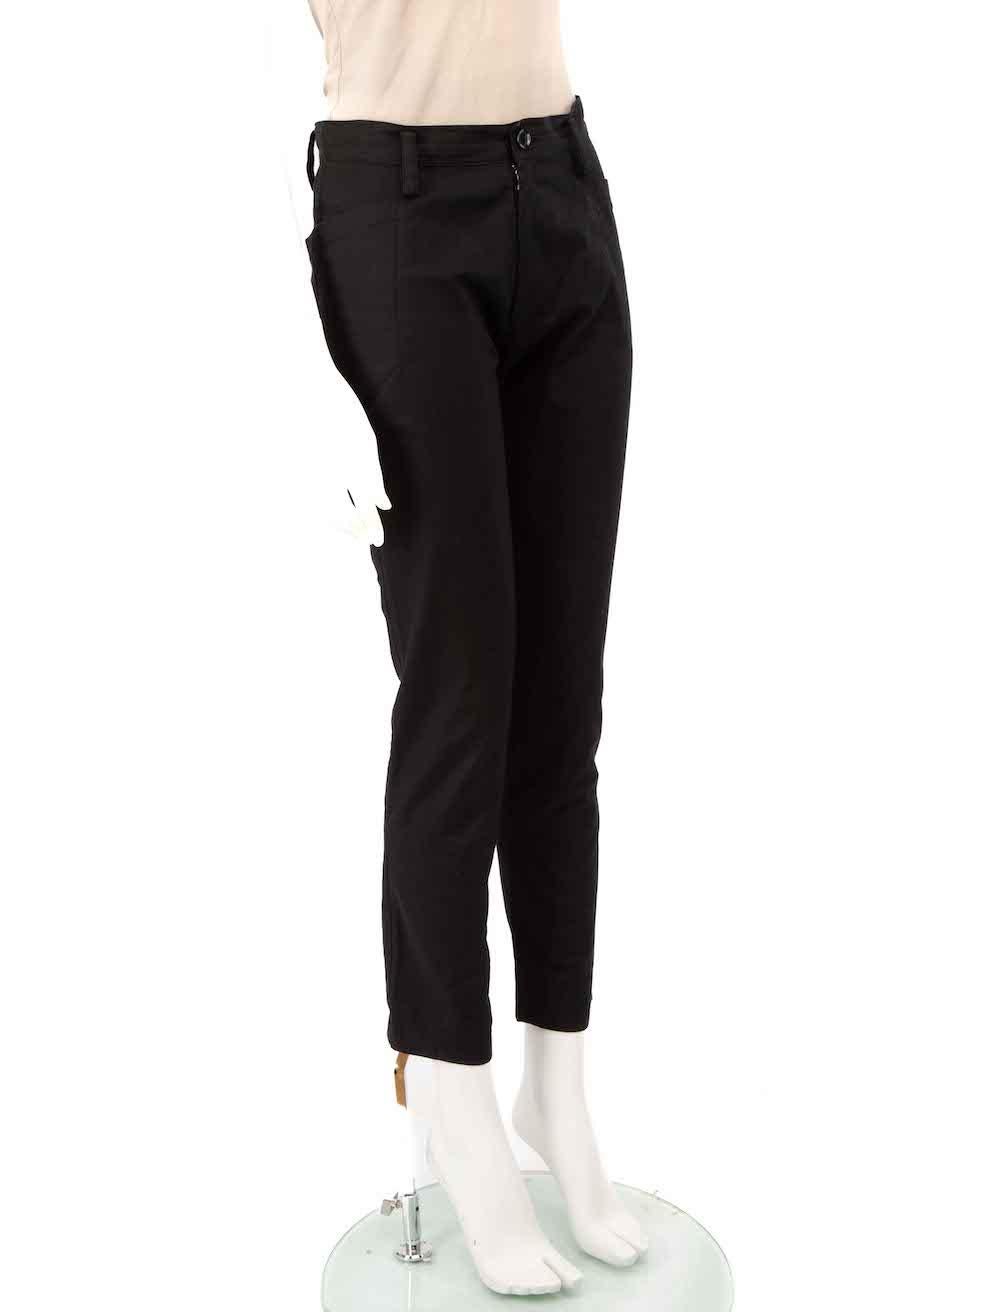 CONDITION is Very good. Hardly any visible wear to trousers is evident on this used Yohji Yamamoto designer resale item.
 
 
 
 Details
 
 
 Black
 
 Cotton
 
 Trousers
 
 Slim fit
 
 High rise
 
 2x Side pockets
 
 Fly zip and button fastening
 
 
